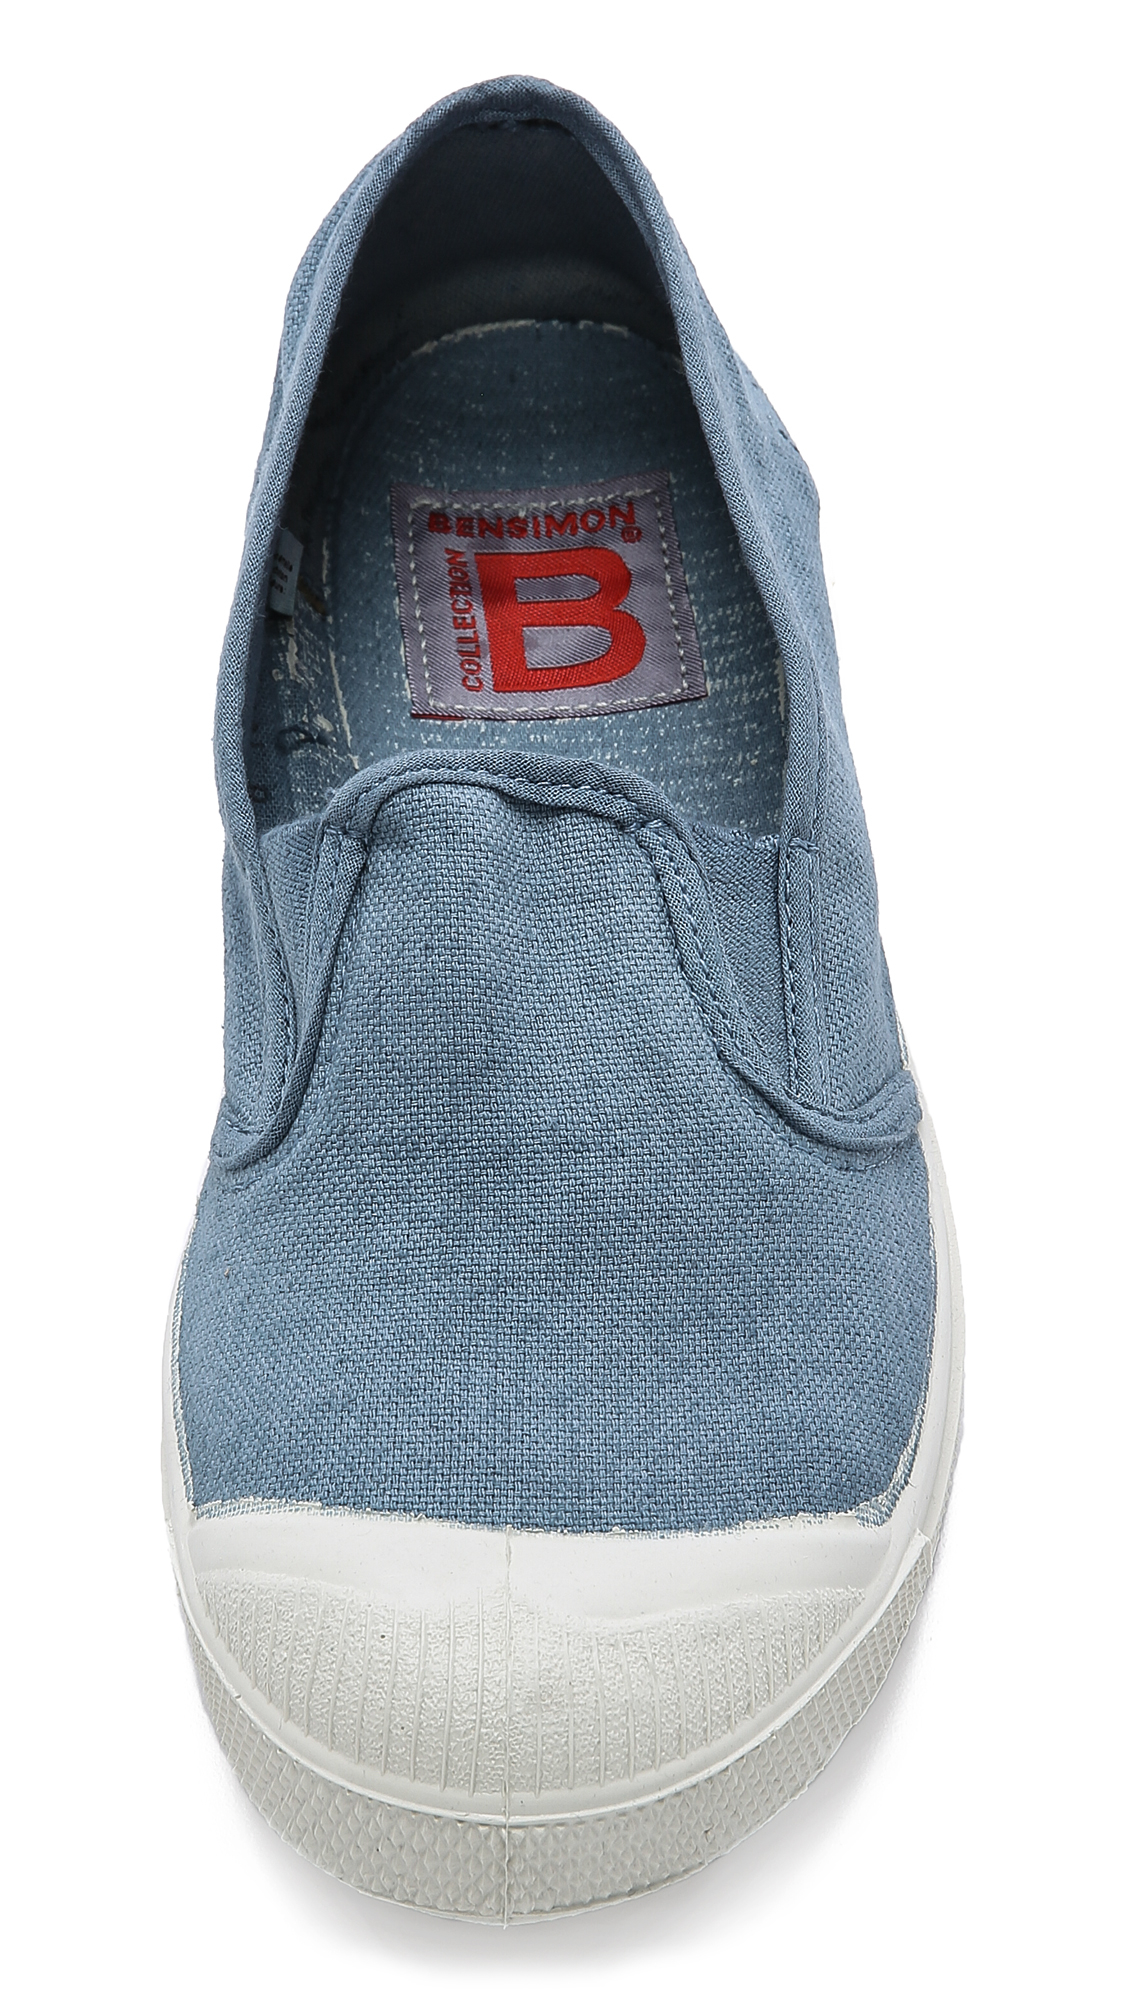 Bensimon Canvas Tennis Tommy Slip On Sneakers - Navy in Blue Grey (Blue) -  Lyst